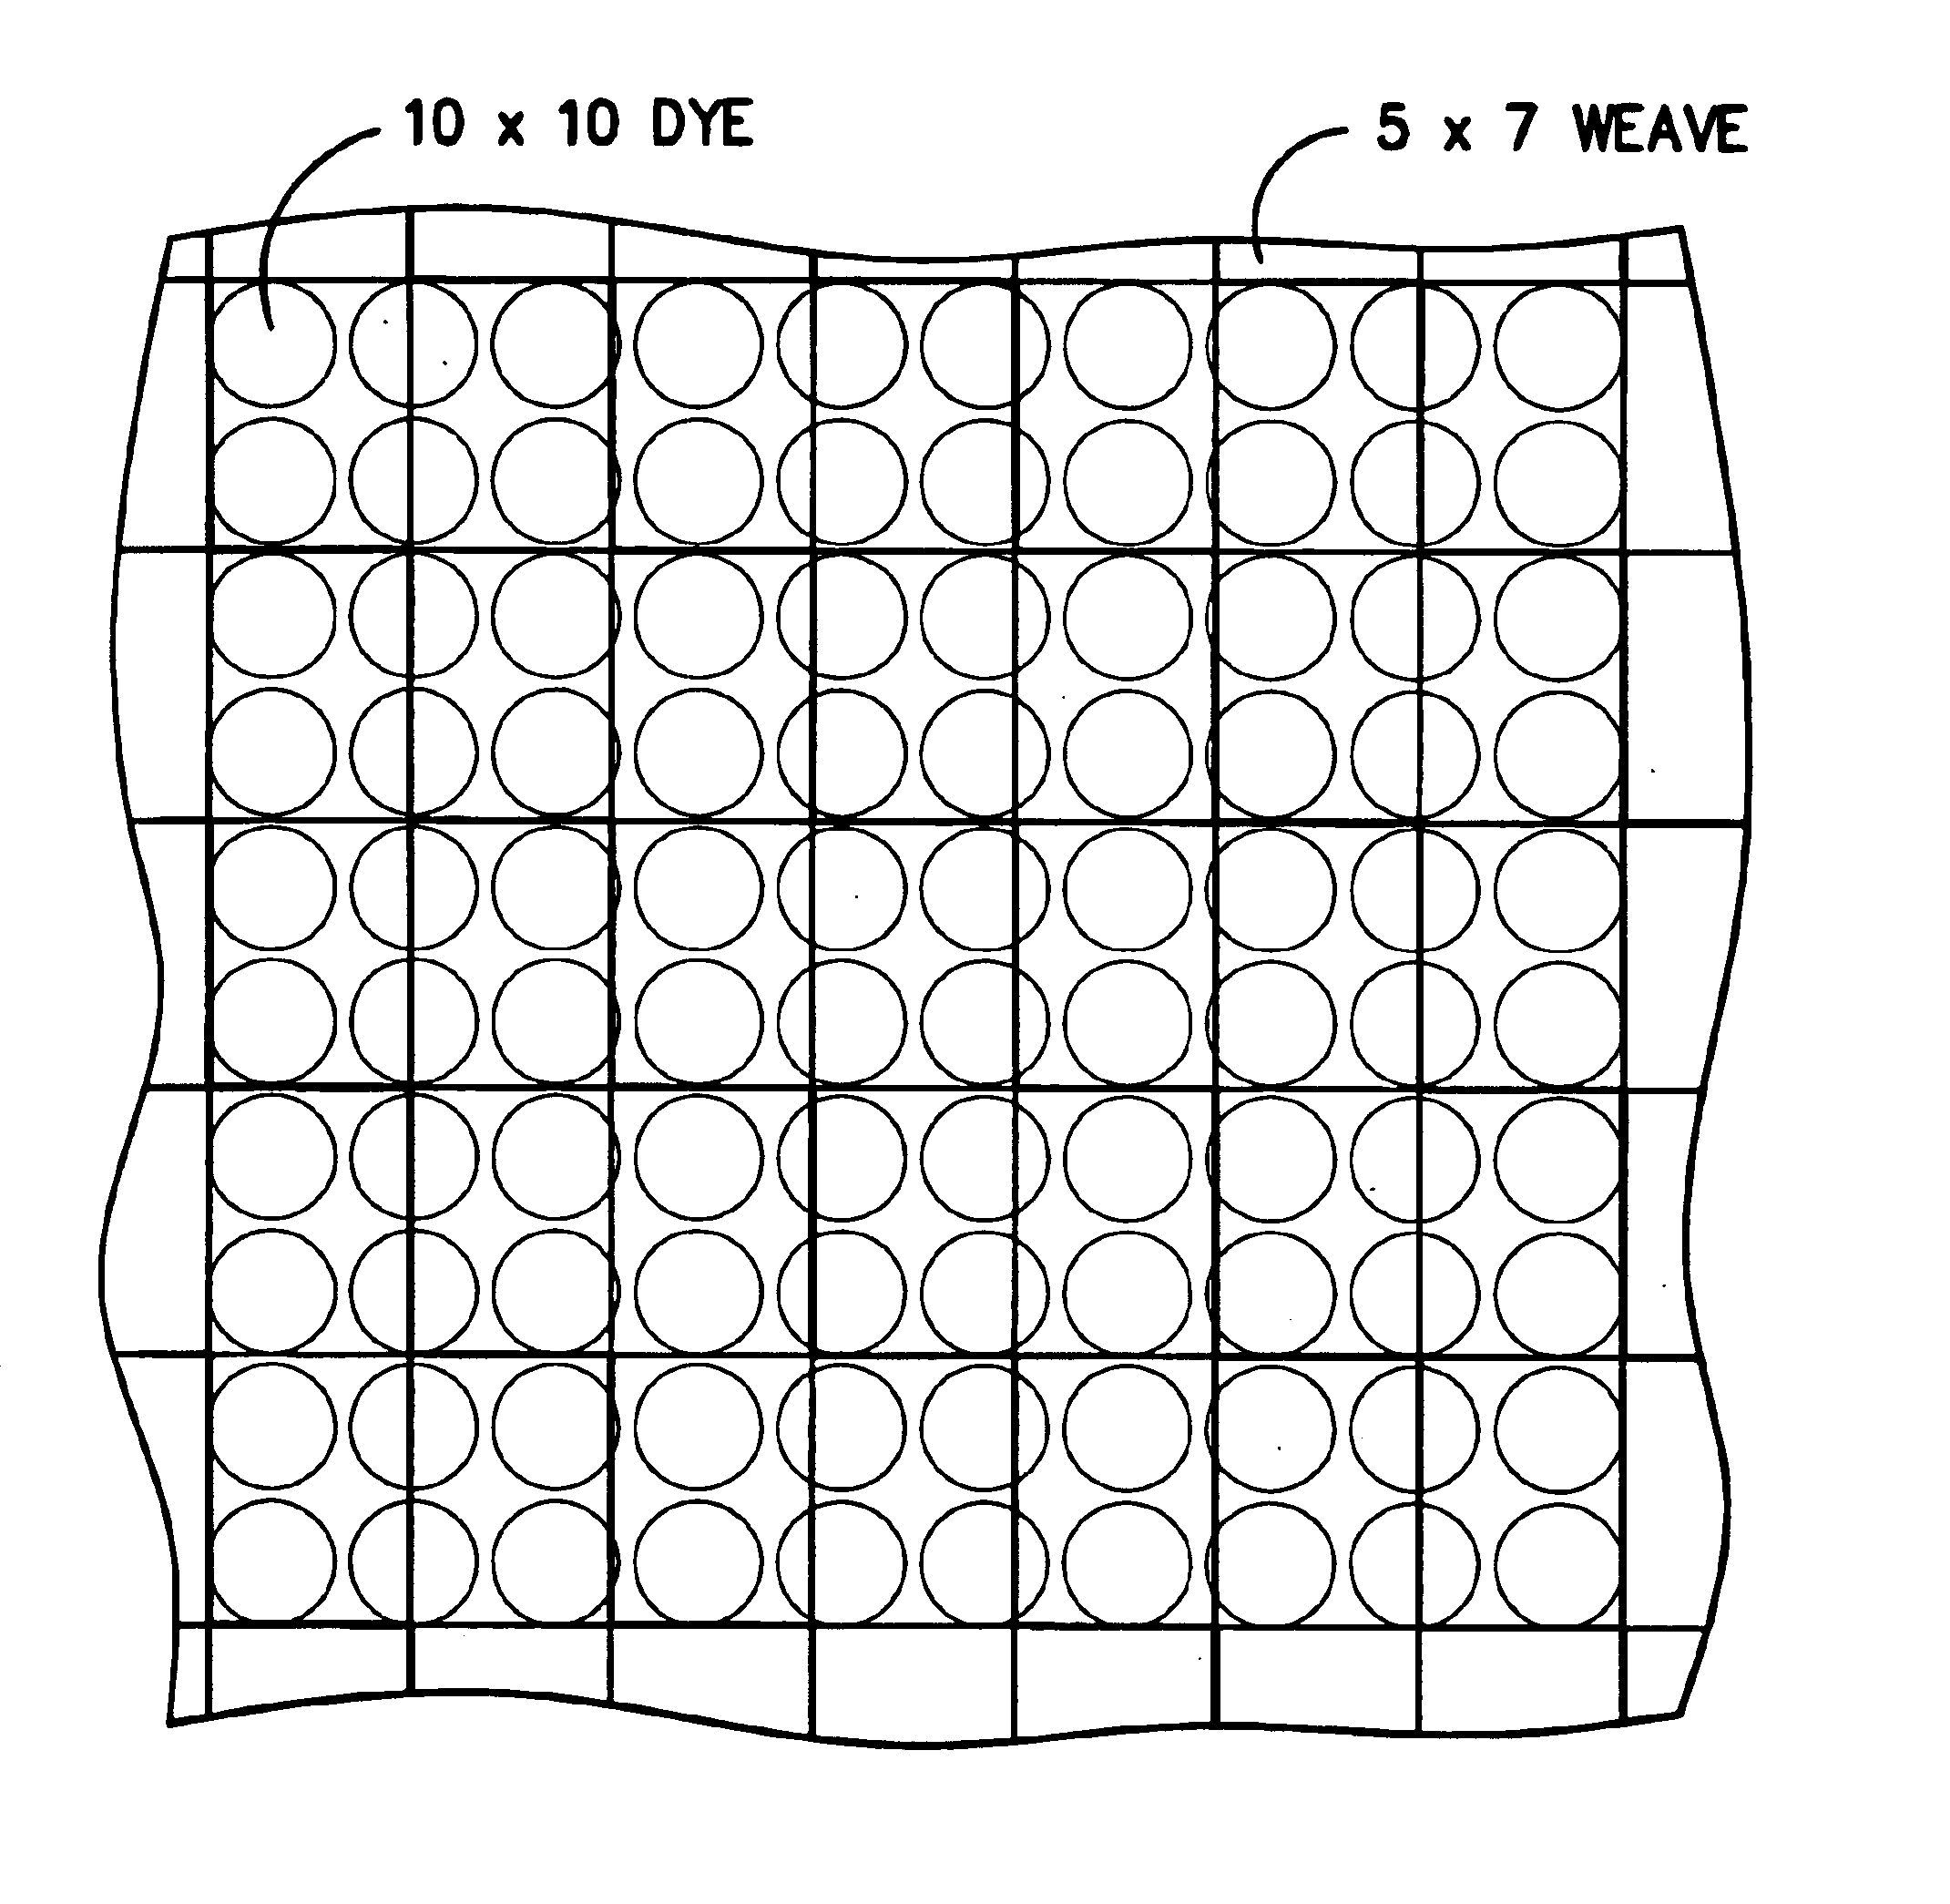 Patterned carpet and method